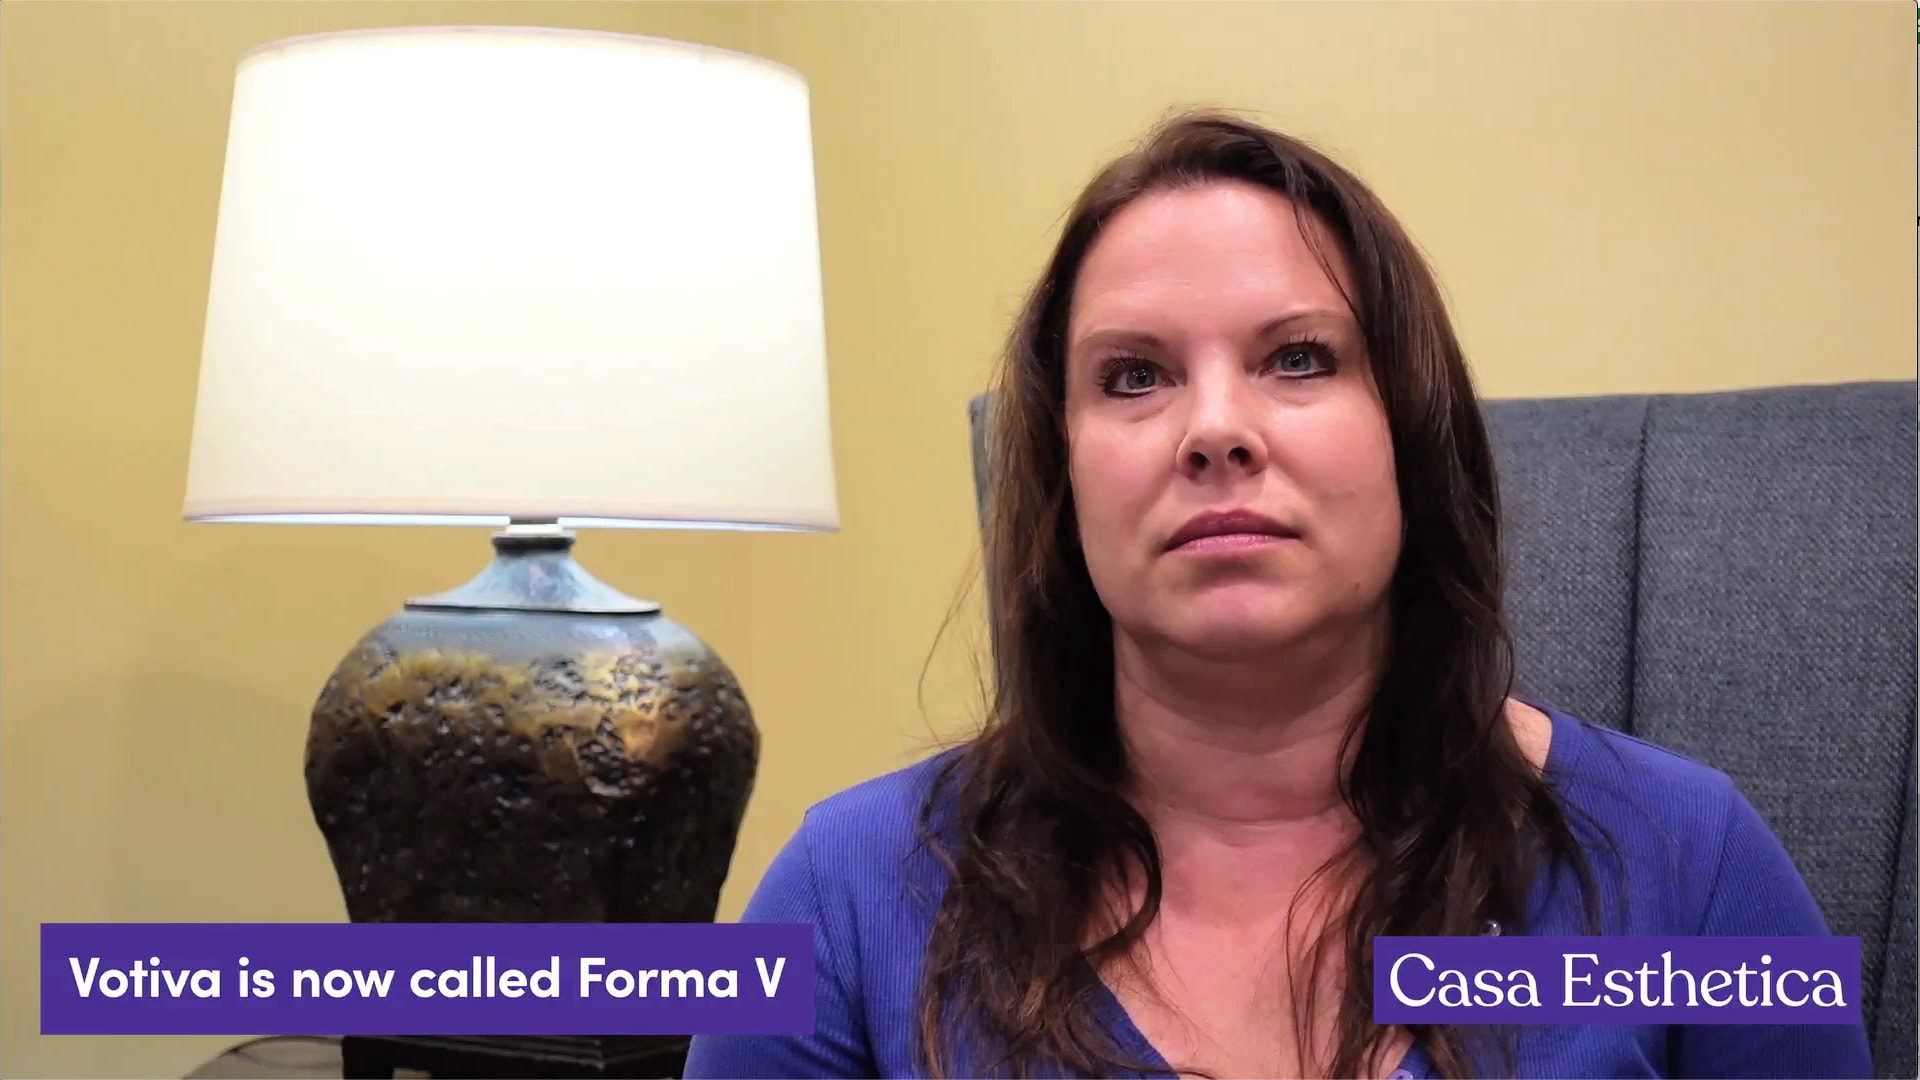 After Breast Cancer, taking Tamoxifen caused Melissa intense vaginal dryness. Treatment with Forma V removed all her dryness